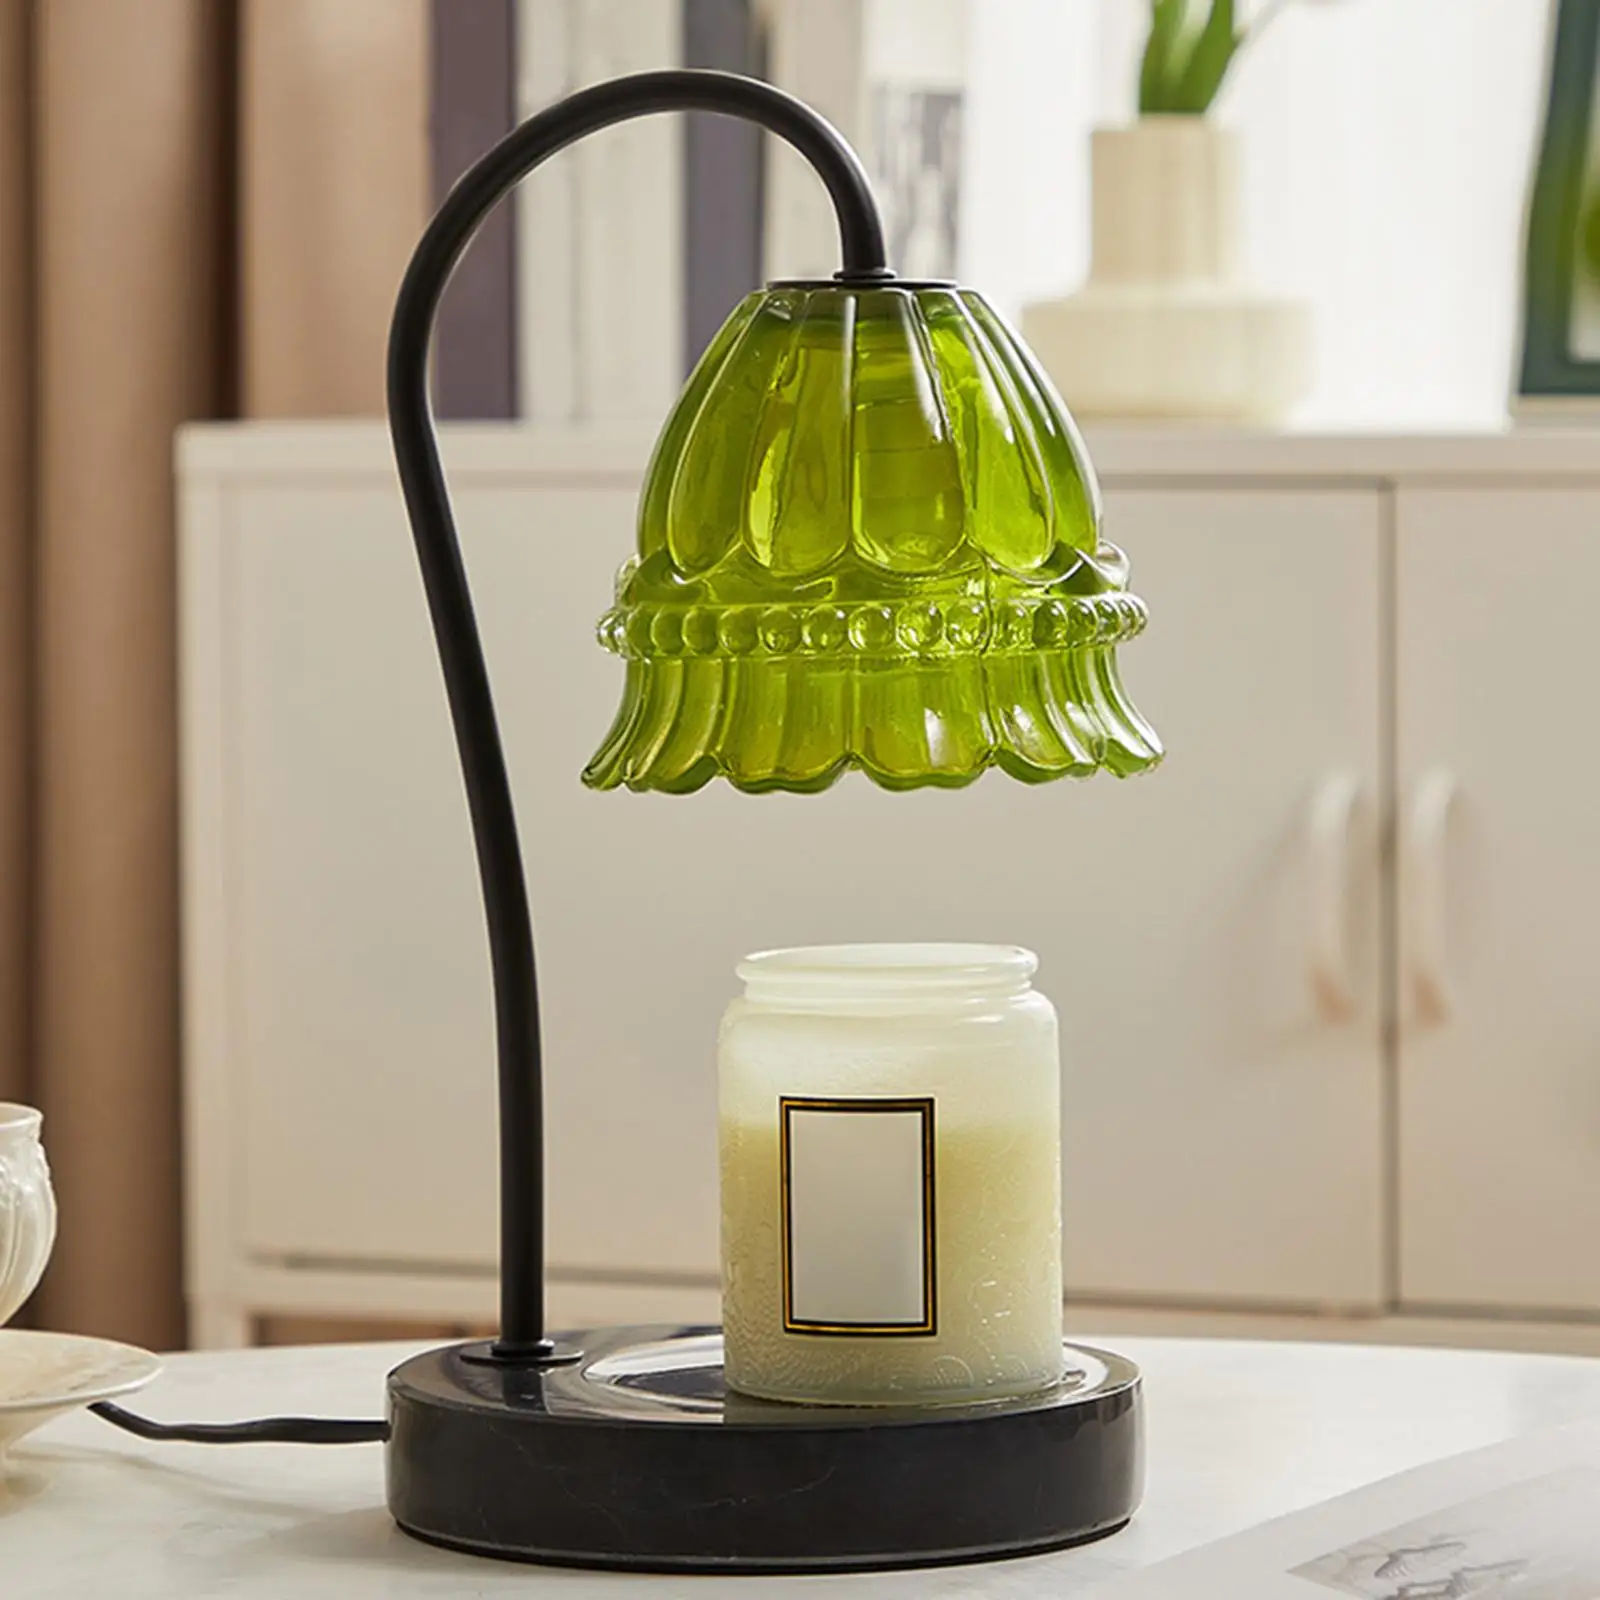 European Style Candle Warmer Lamp Adjustable Marble Lamp Bedside Lights Dimmable